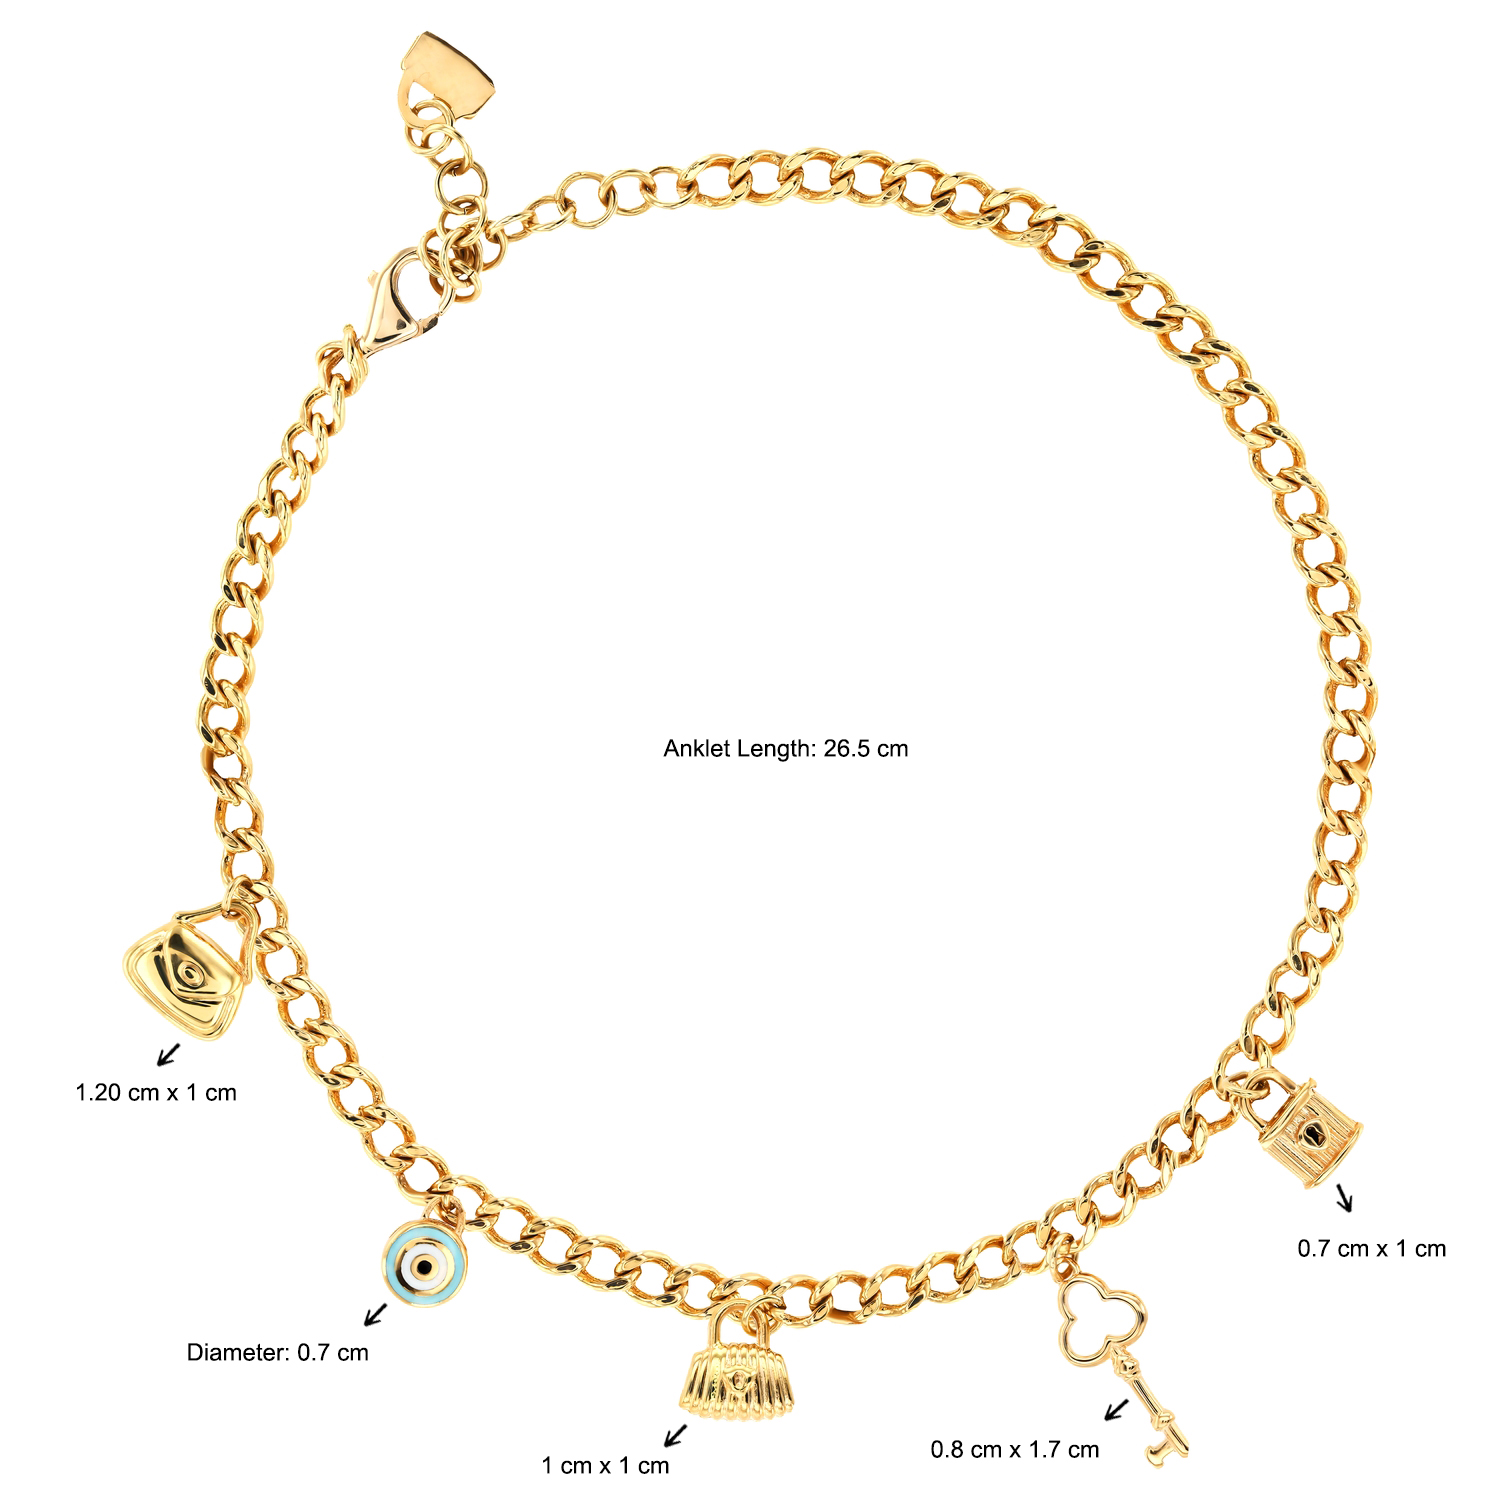 Lowe Mystic Charms 21K Gold Anklet